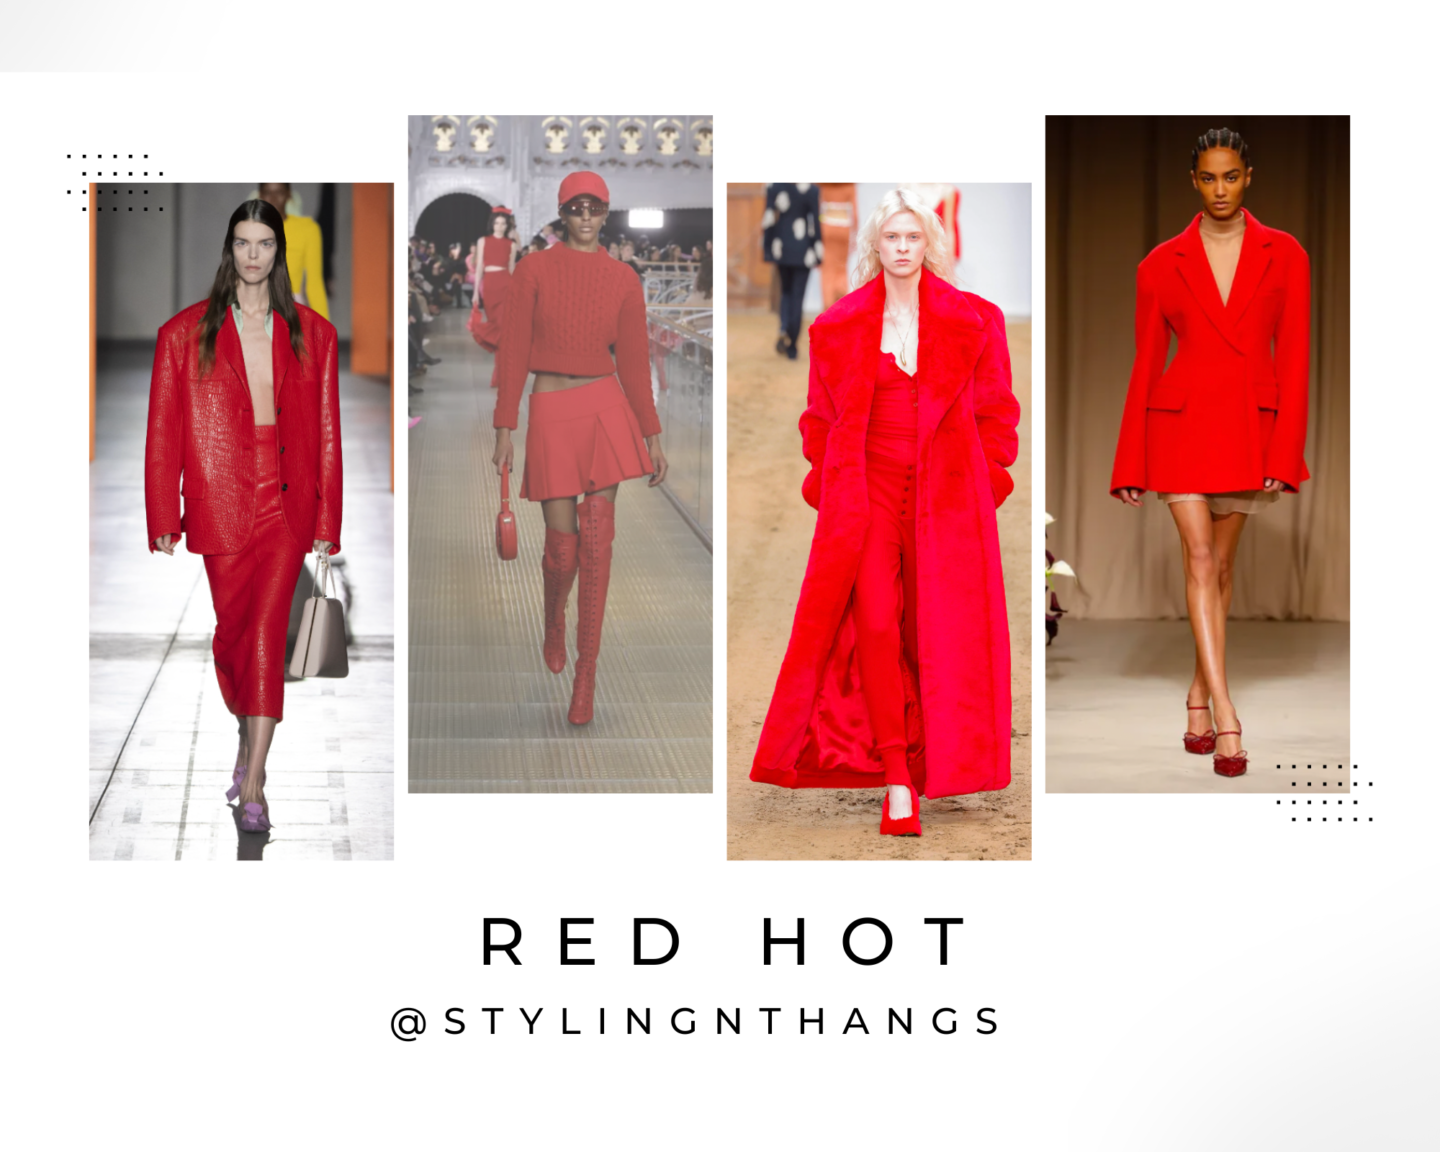 Models strut down the runways in striking red ensembles, showcasing the bold and passionate red hot fall fashion trend of 2023.